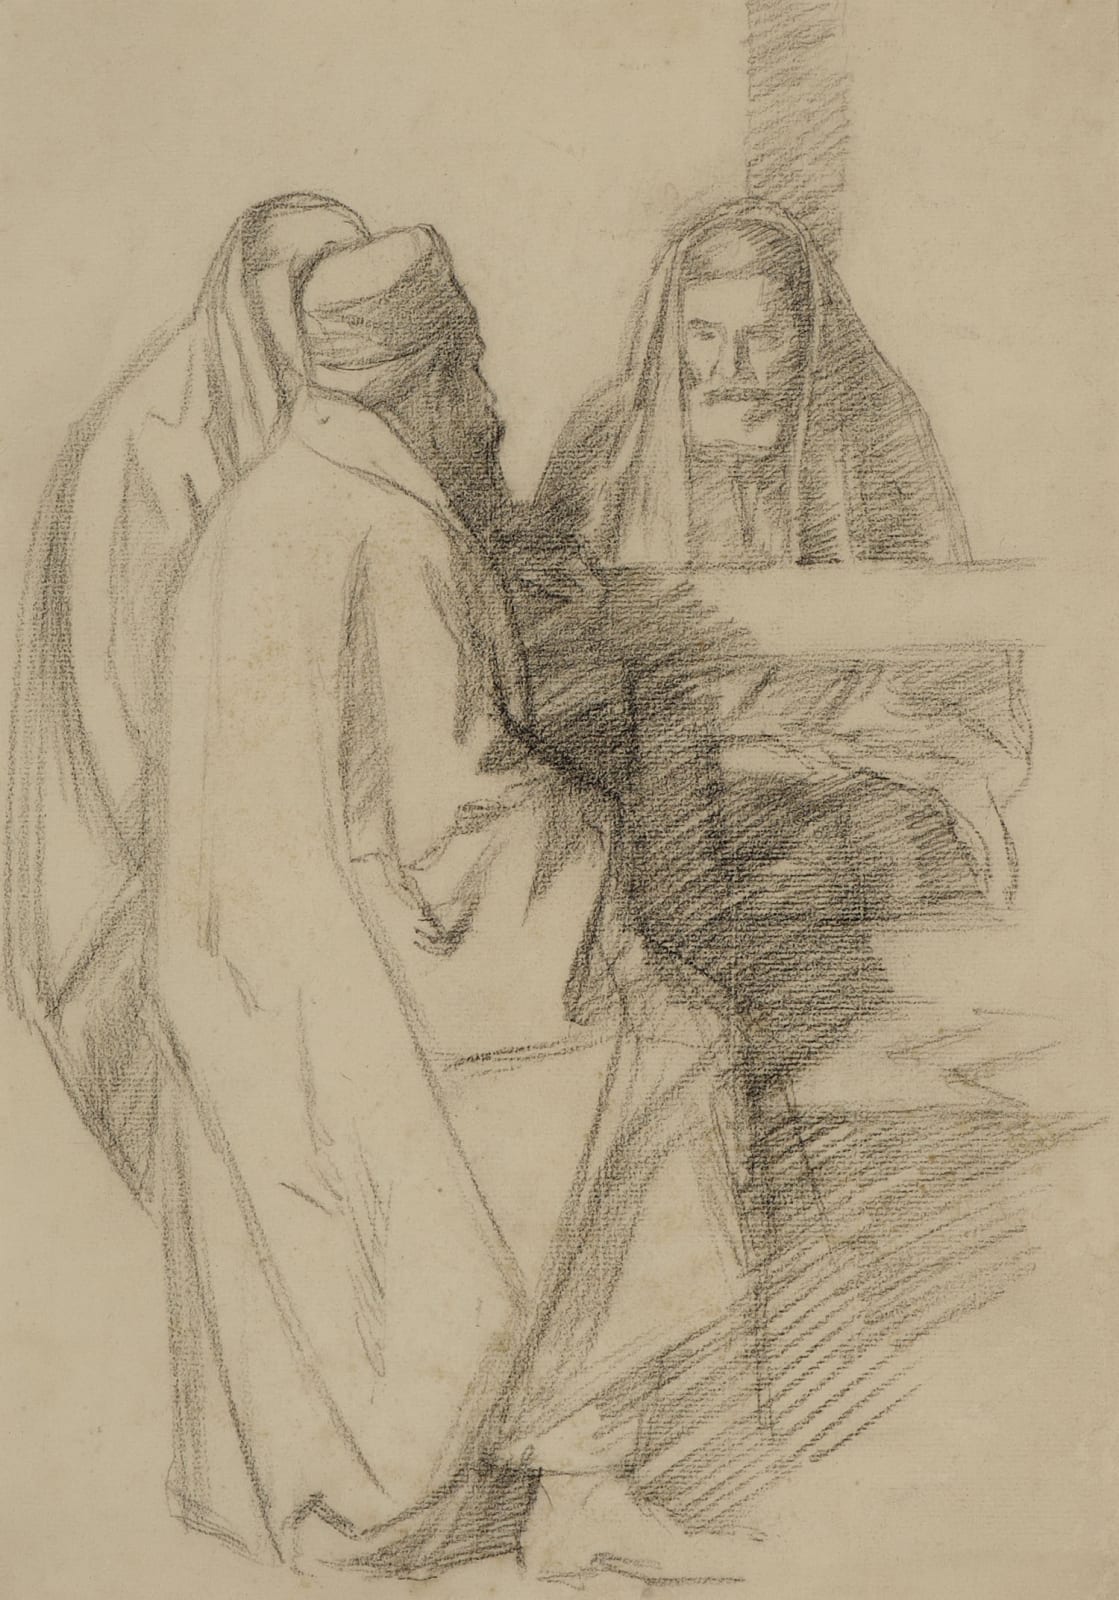 William Rothenstein (1872-1945) Talmudic Discussion c. 1905 Pencil on paper 37 x 25.5 cm Ben Uri Collection To see and discover more about this artist click here